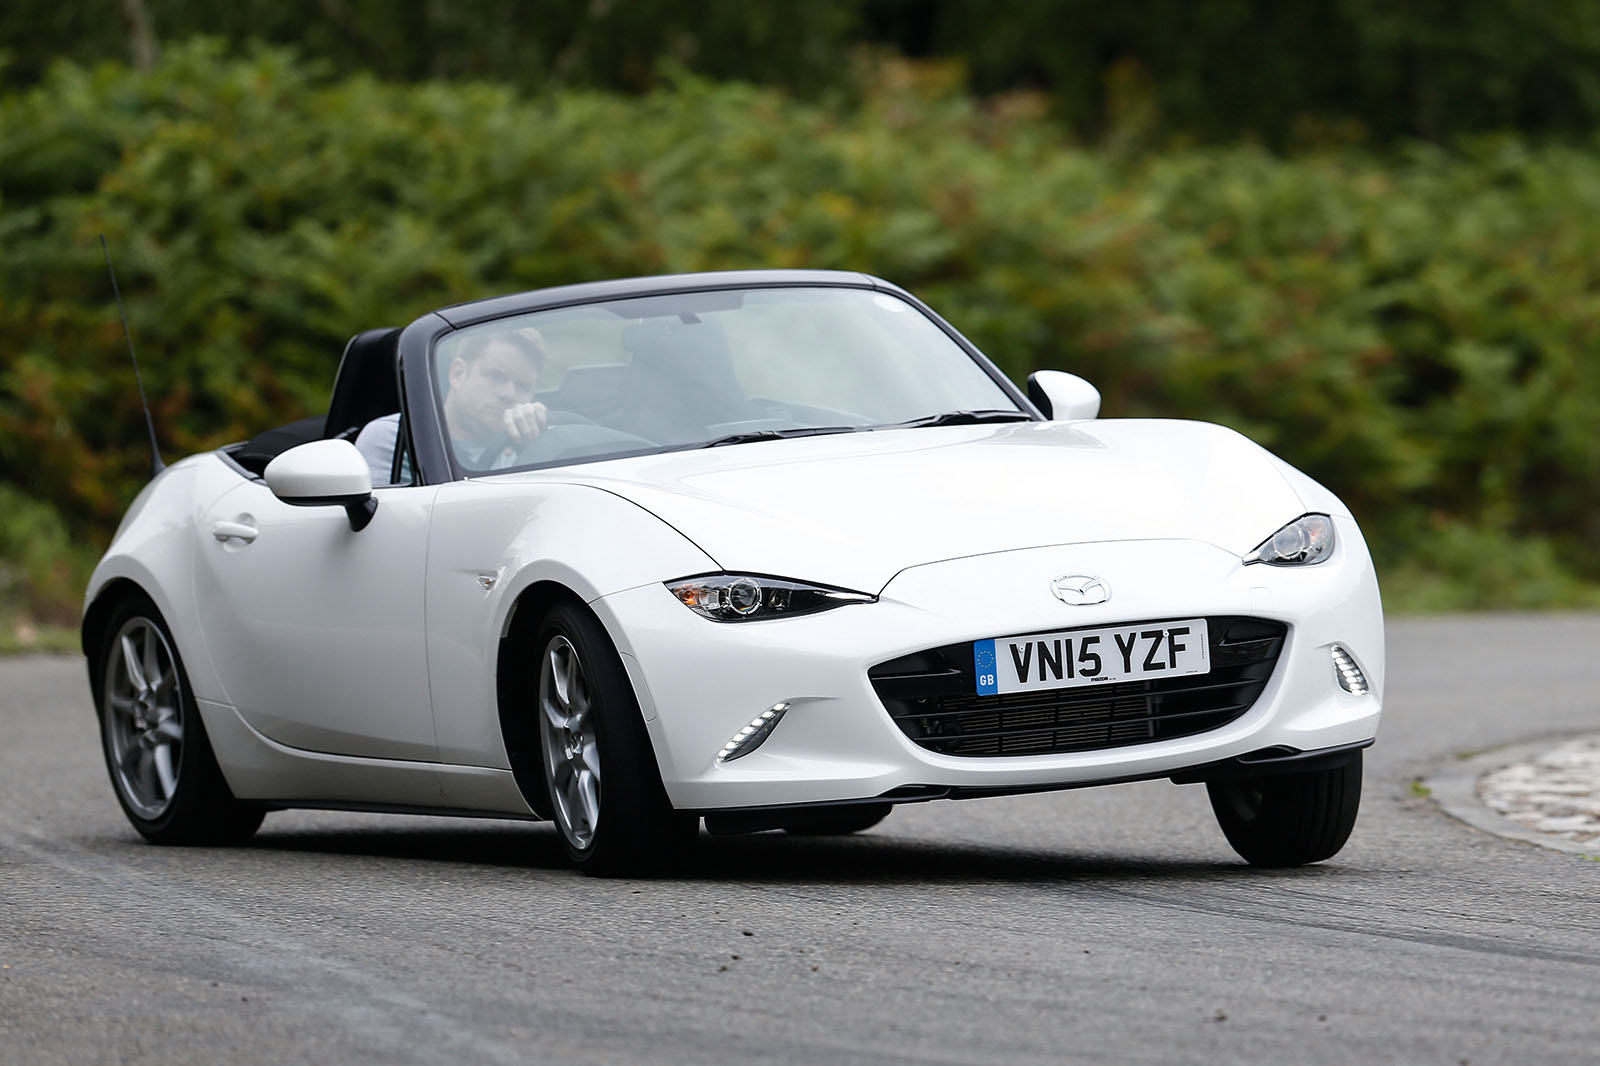 The outstanding 4.5 star Mazda MX-5